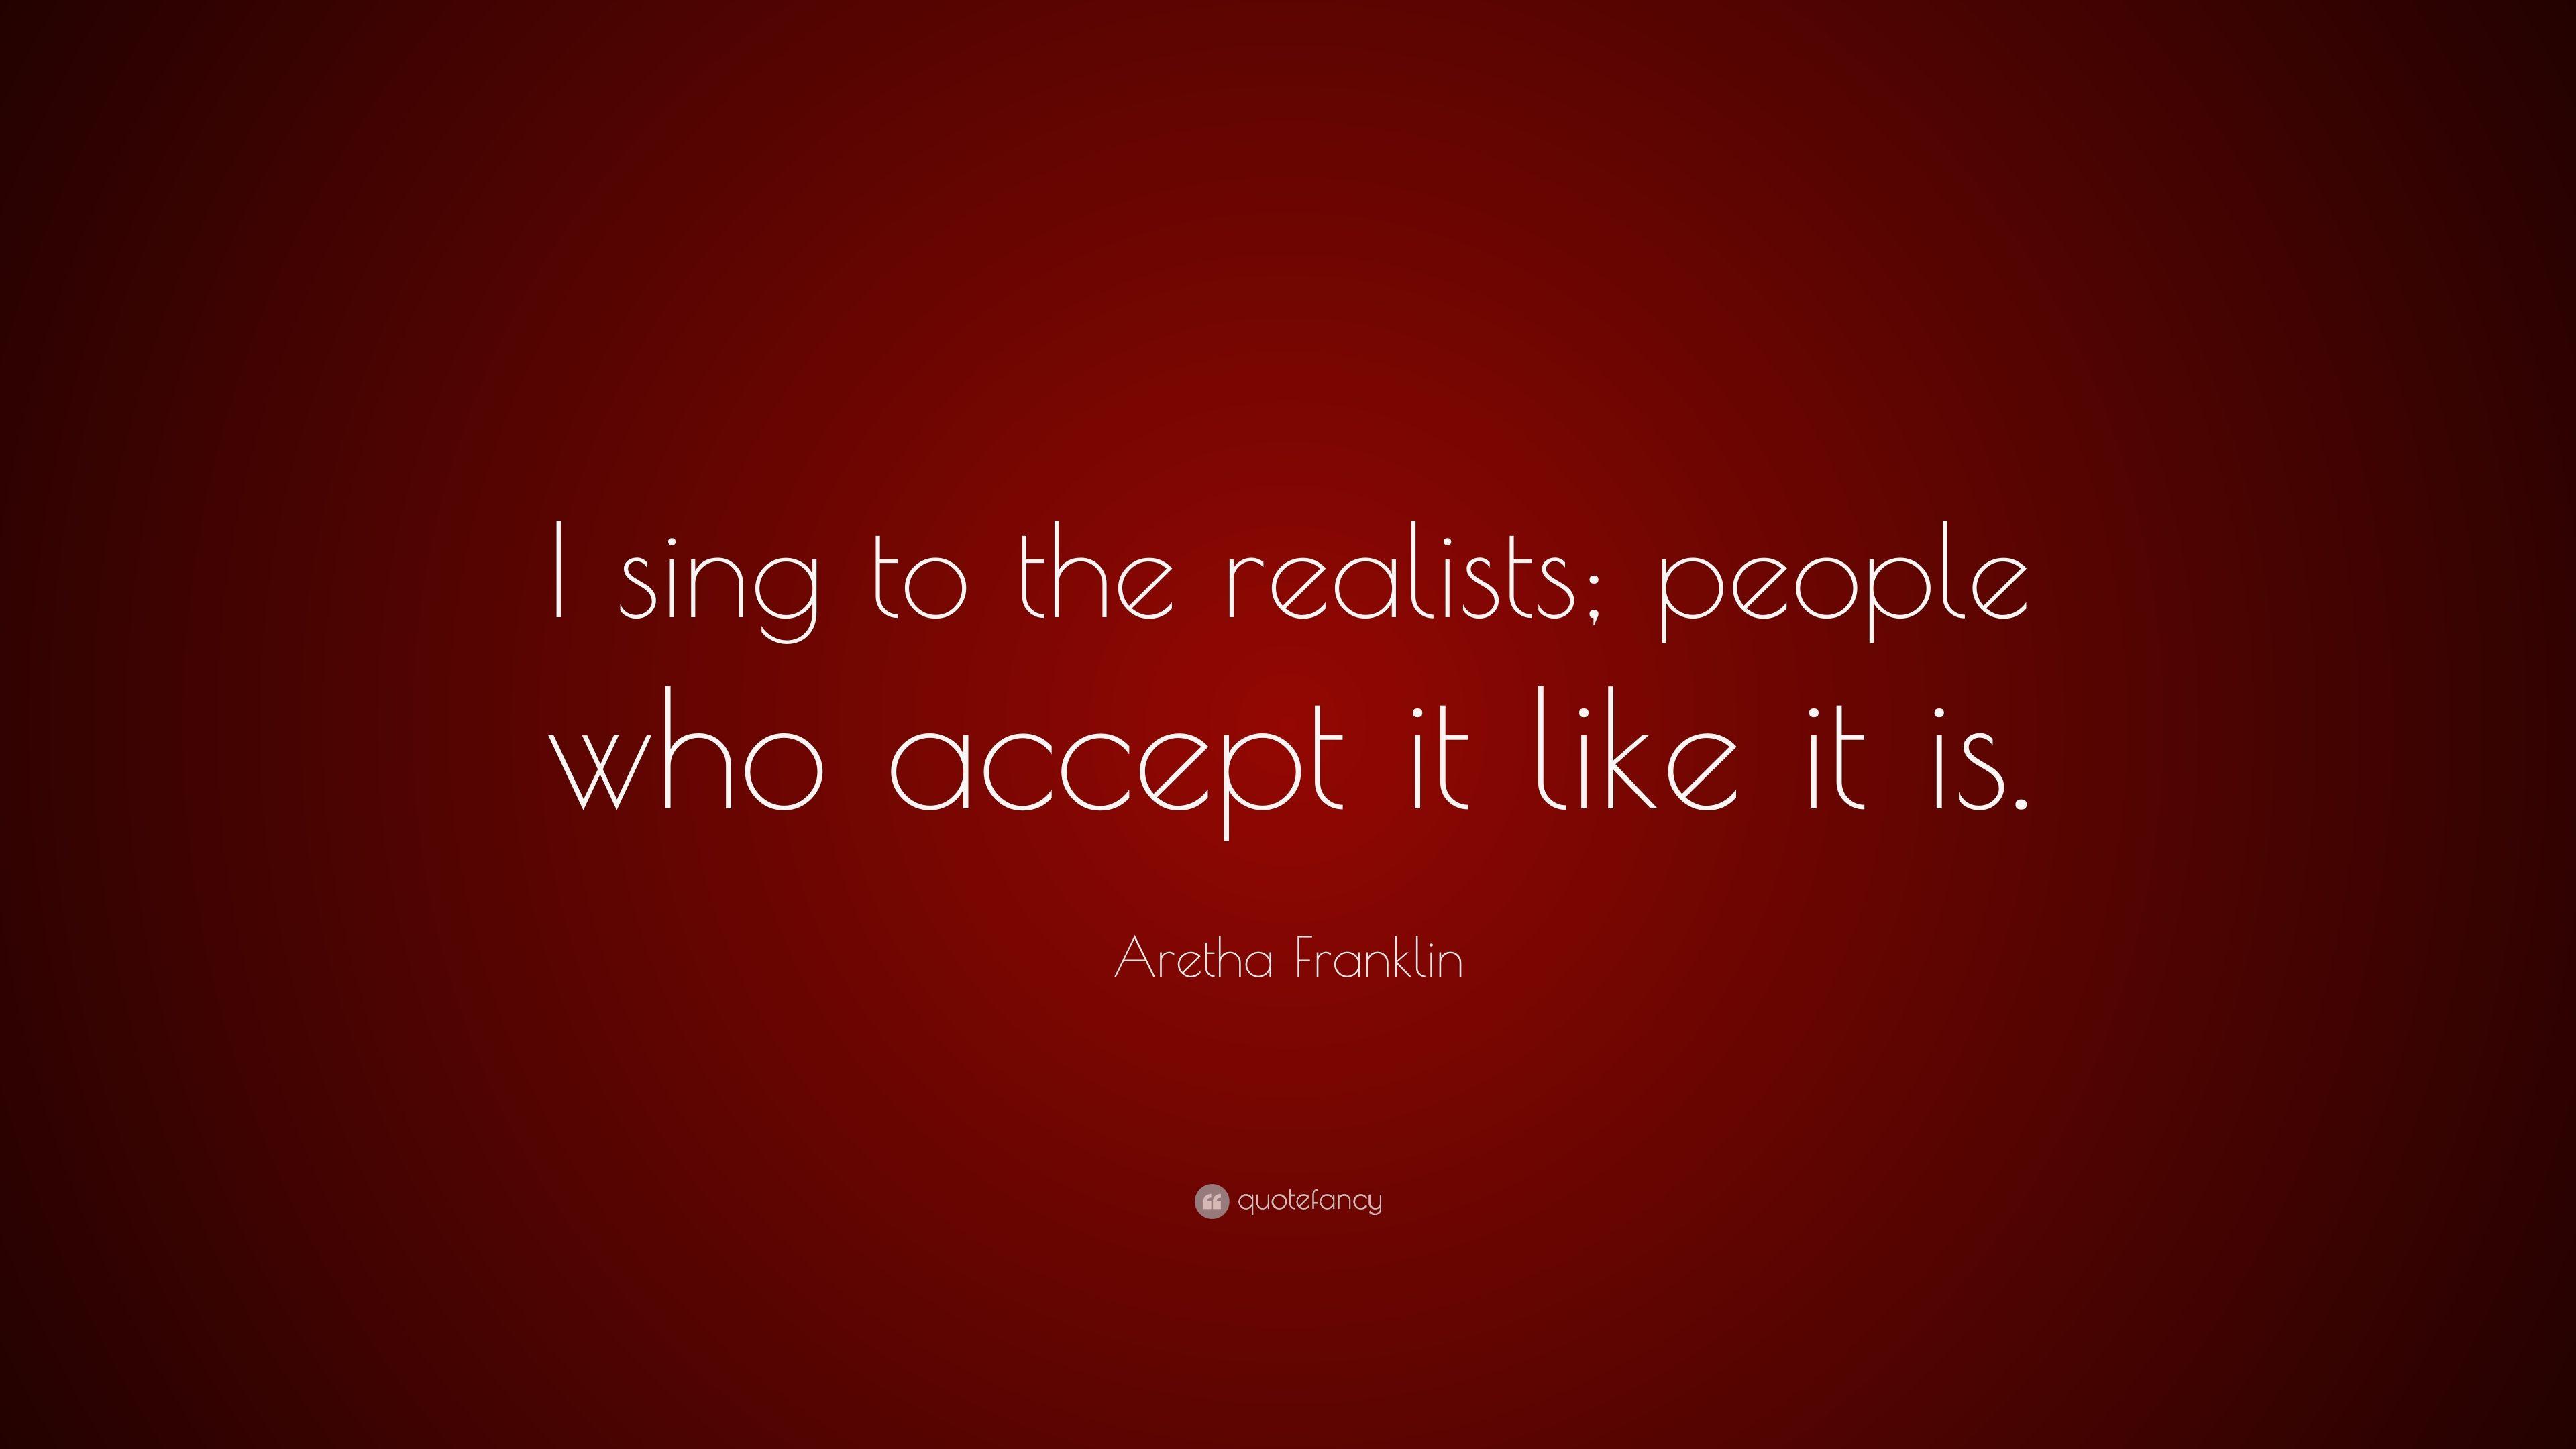 Aretha Franklin Quote: “I sing to the realists; people who accept